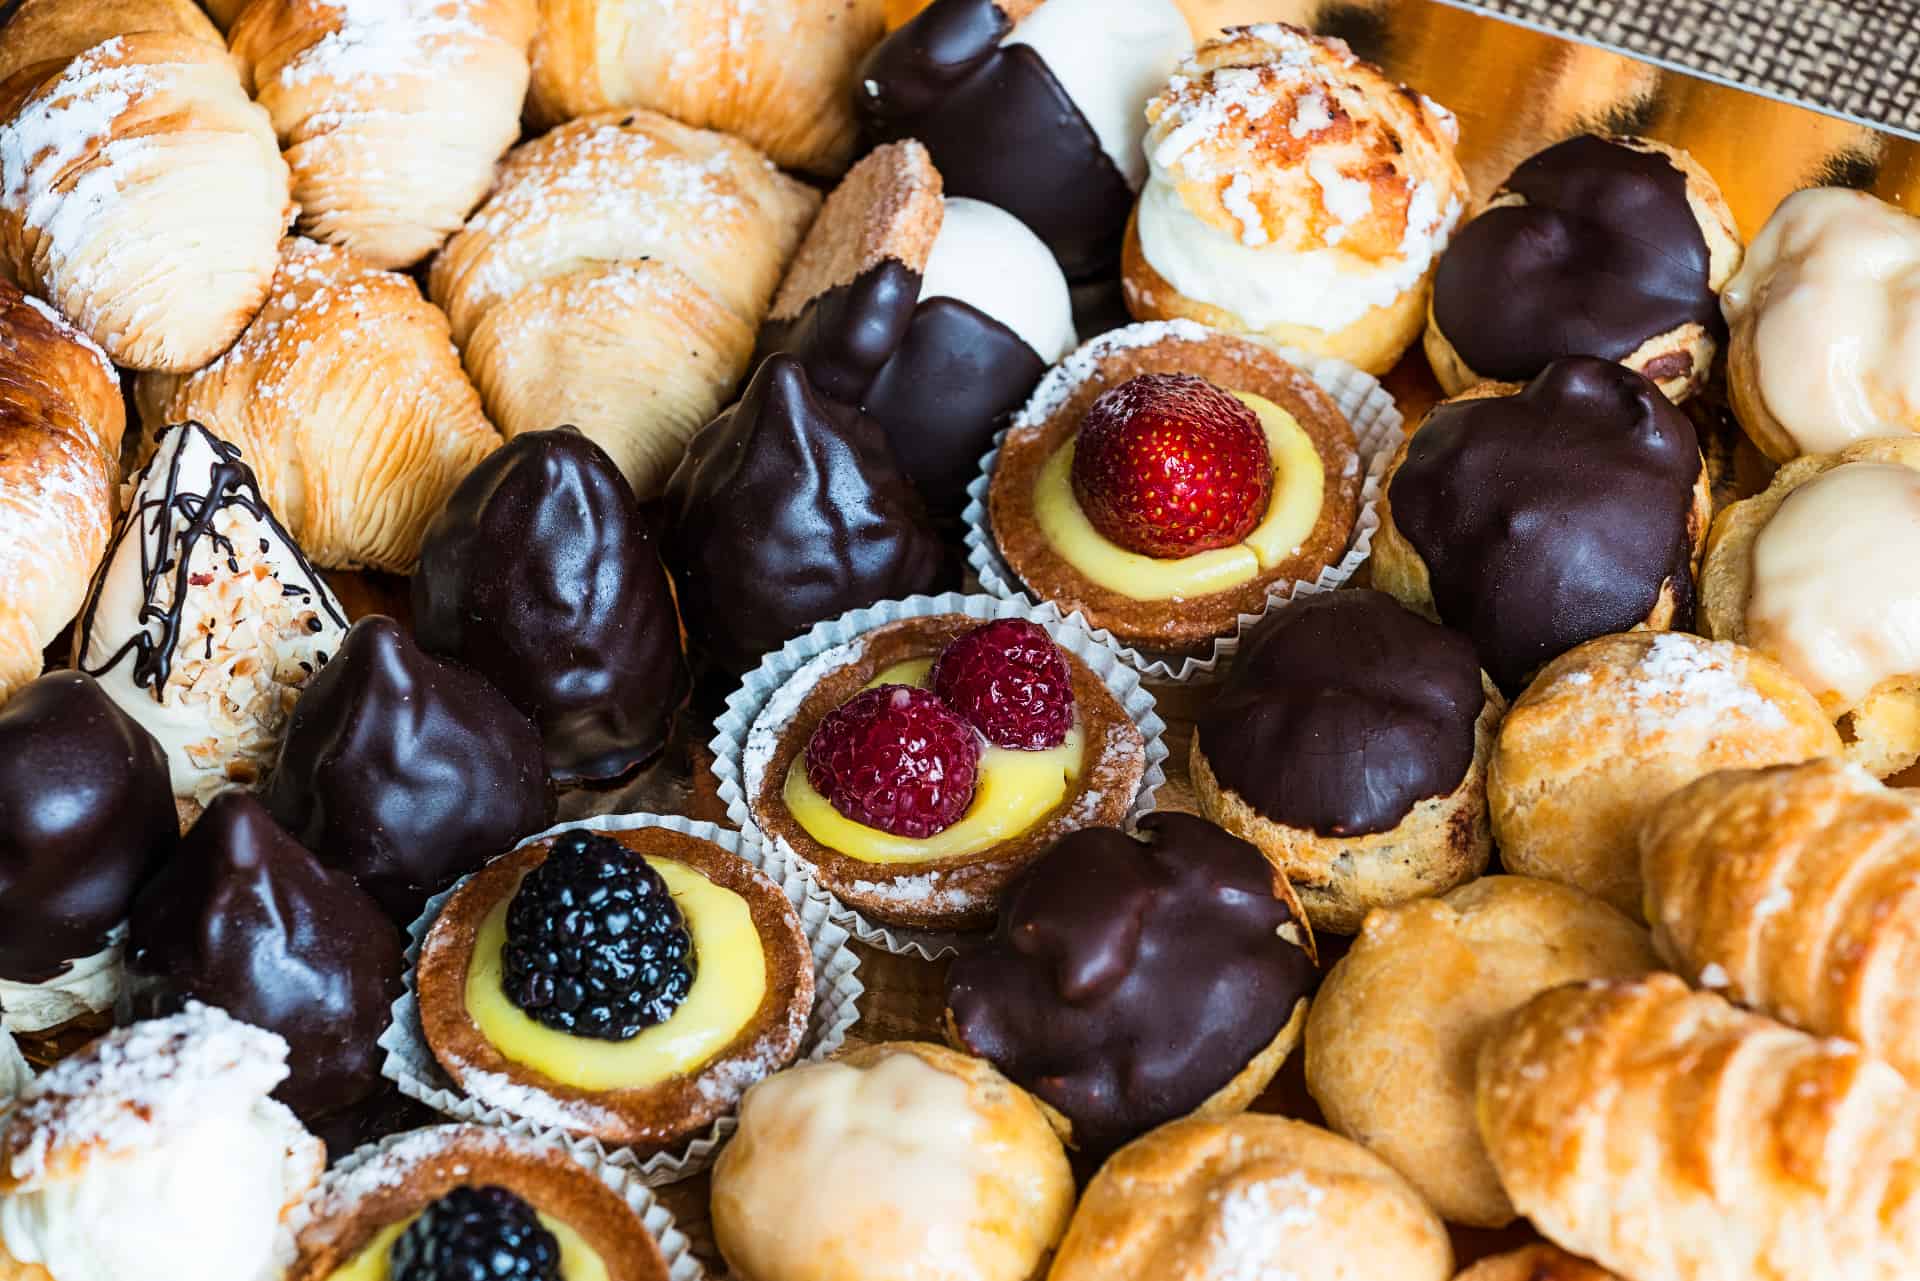 Share more than 137 famous italian cakes latest - in.eteachers